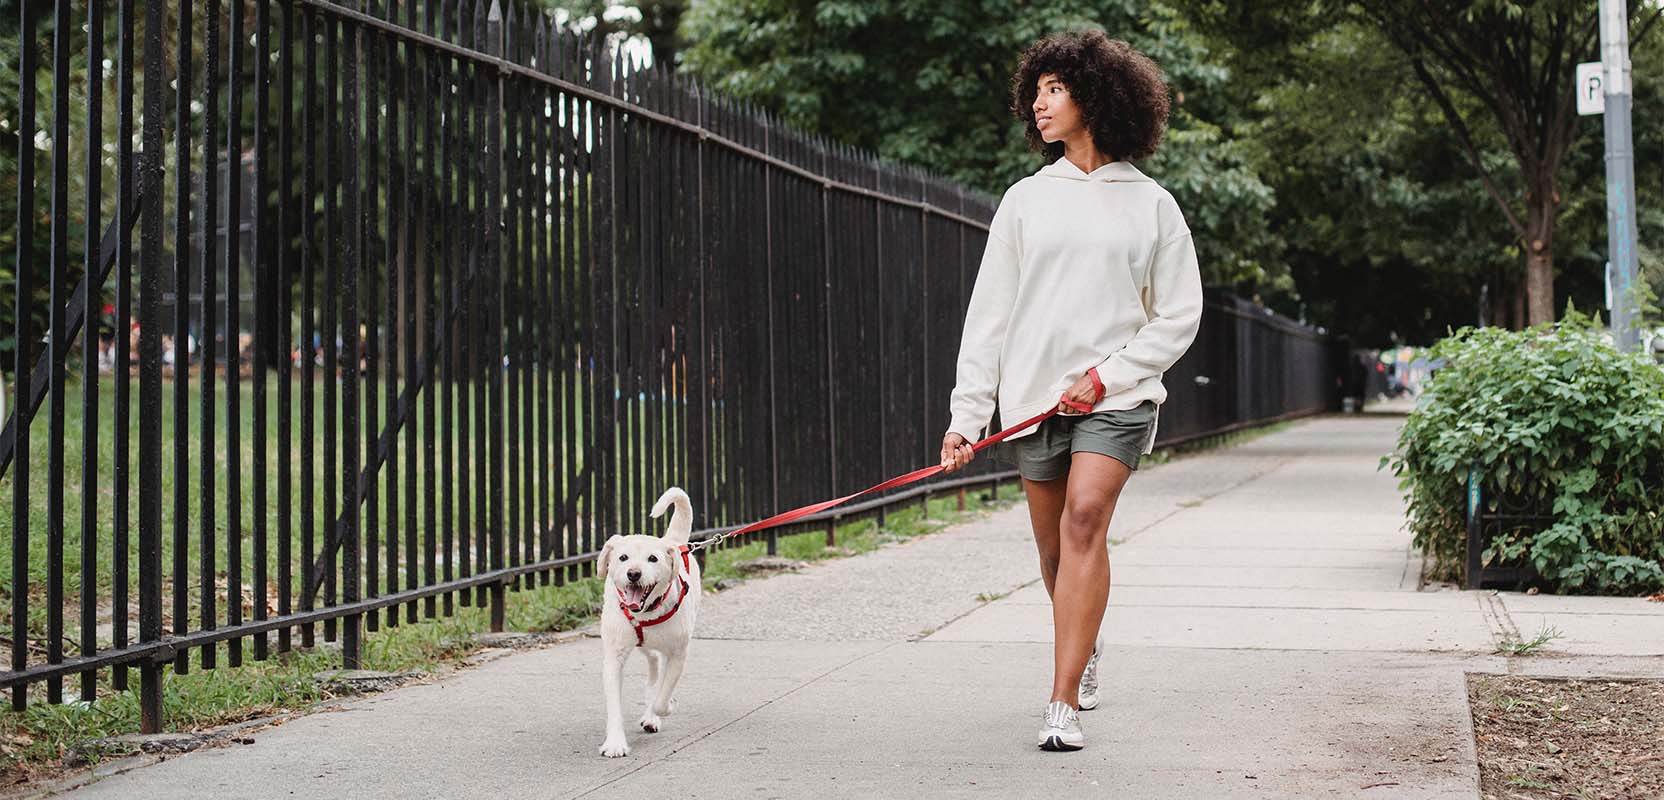 How much do dog walkers make?